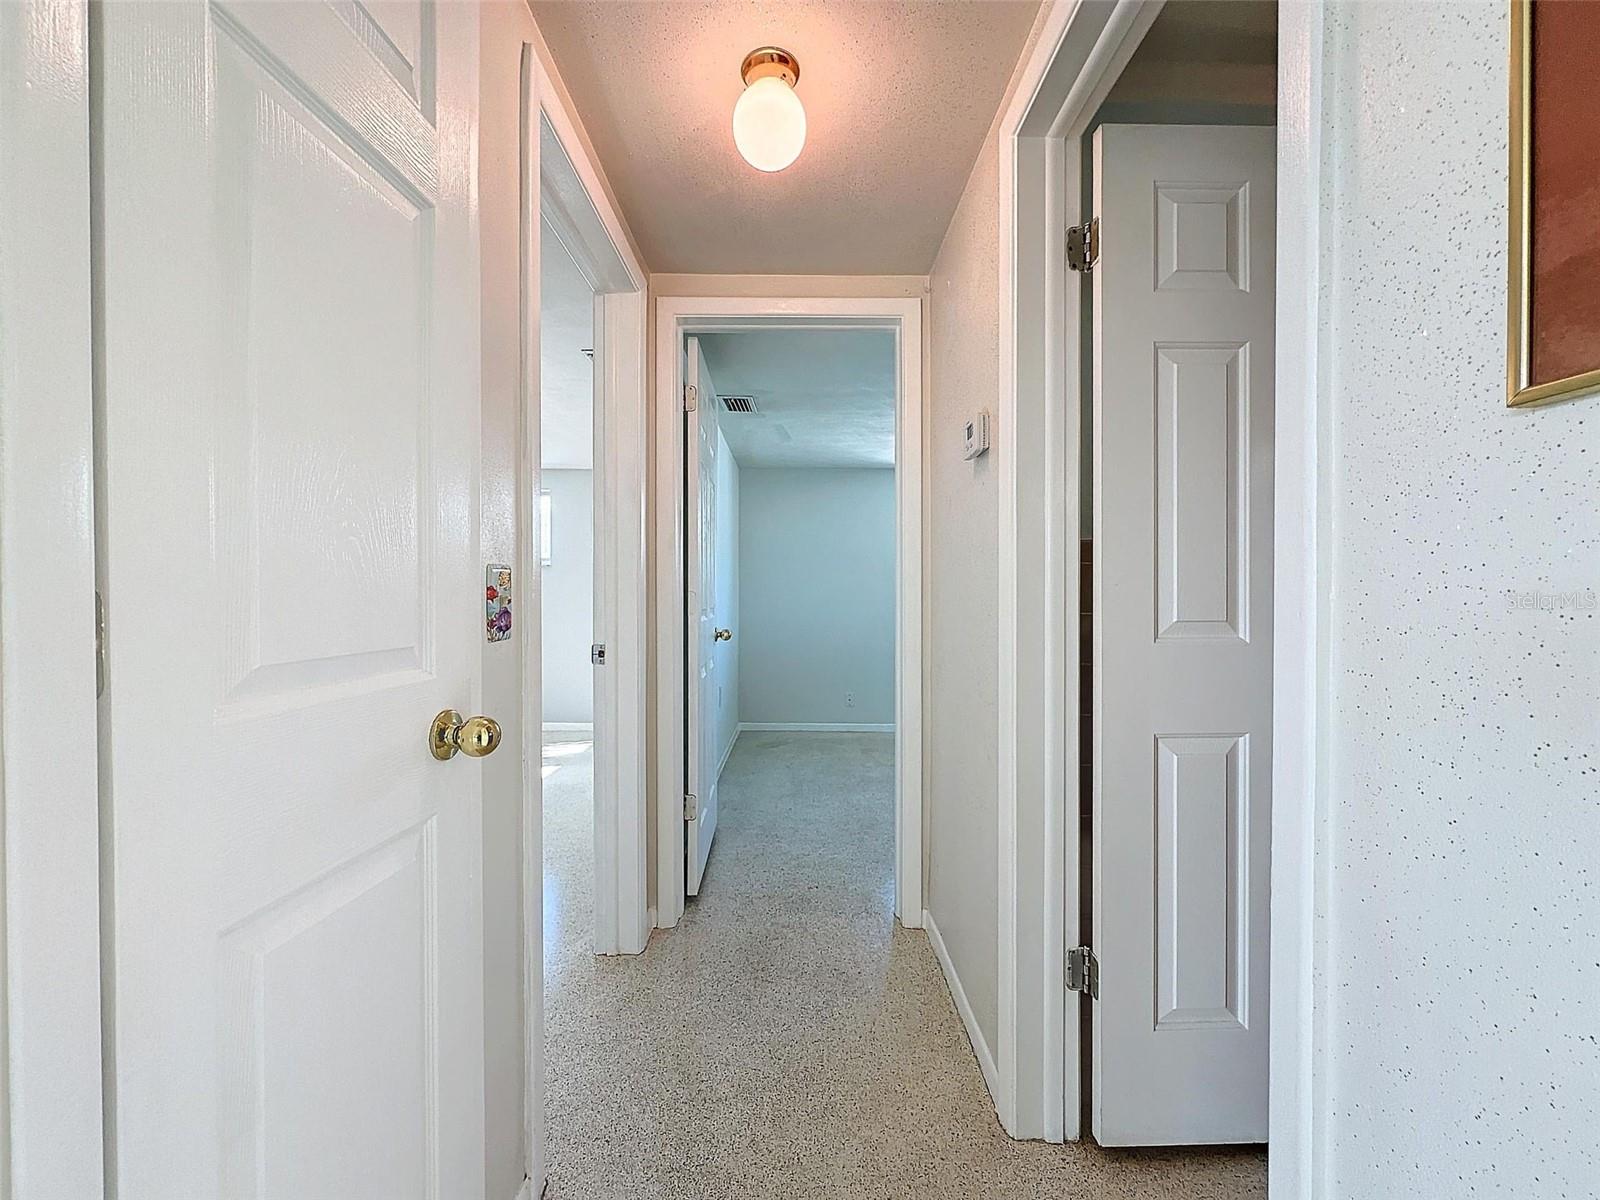 Hallway leading to beds and bath.